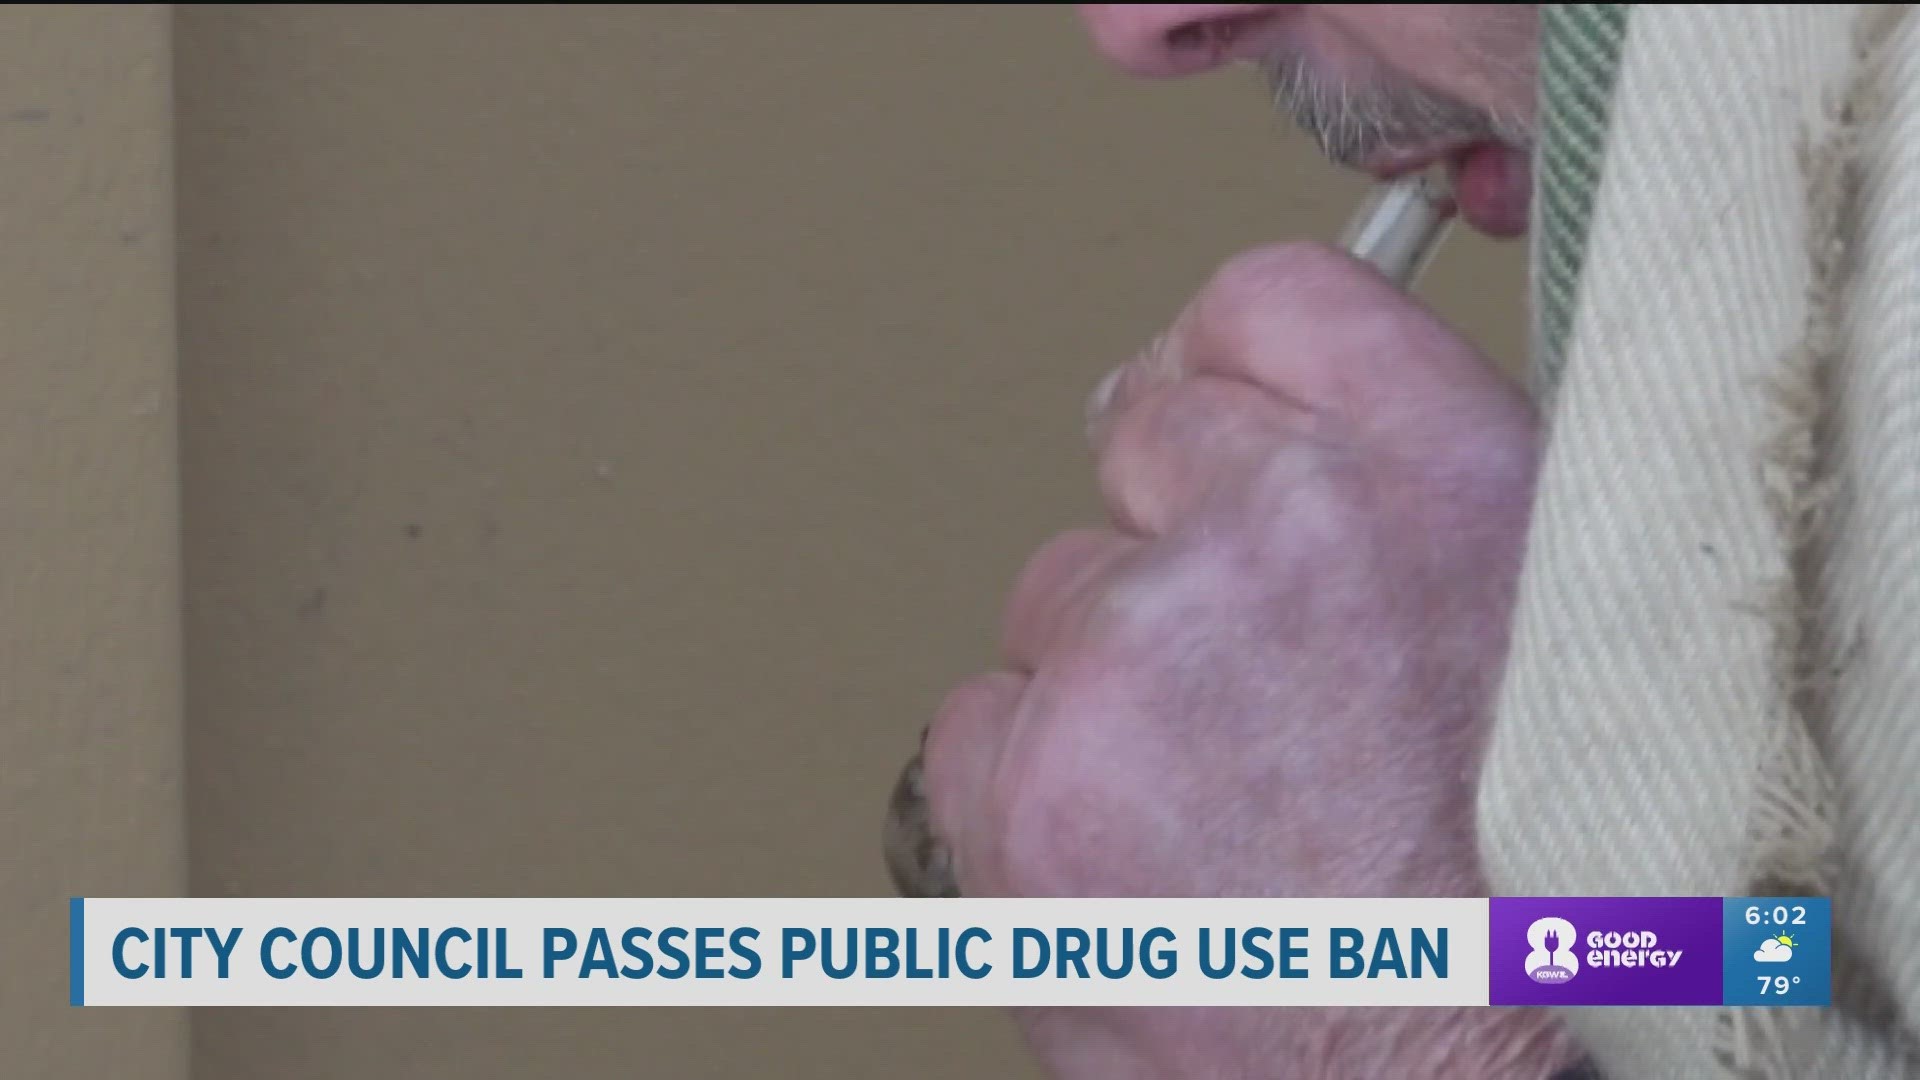 The new ordinance will only take effect if Oregon law changes. Current state statues prohibit local governments from criminalizing public substance use.